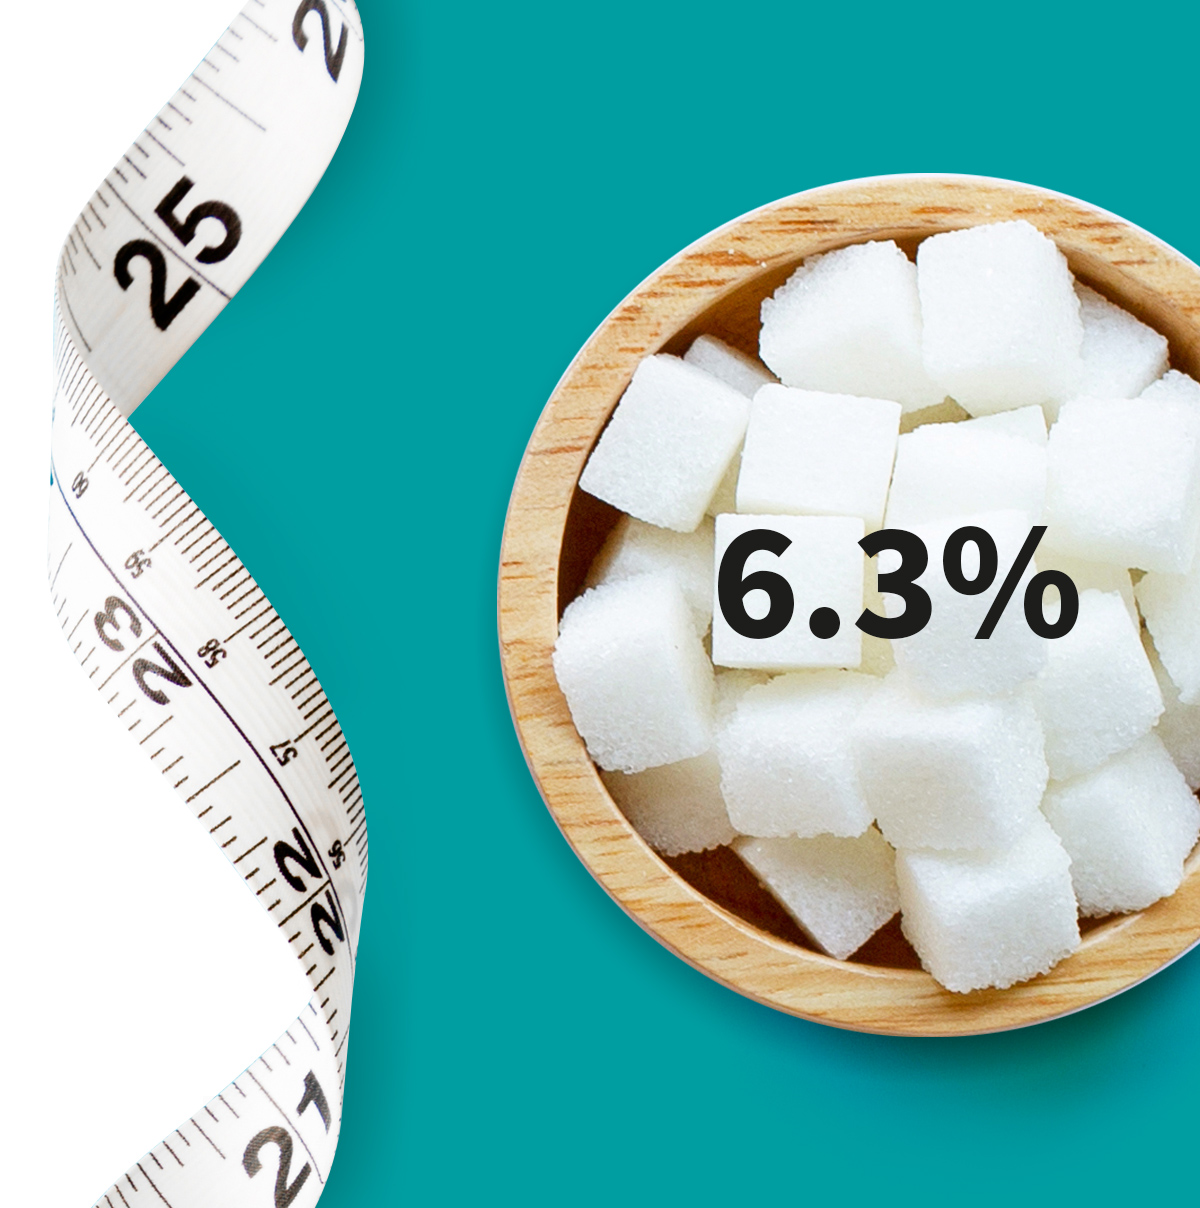 A measuring tape and a bowl full of sugar cubes shown as a metaphor for diabetes